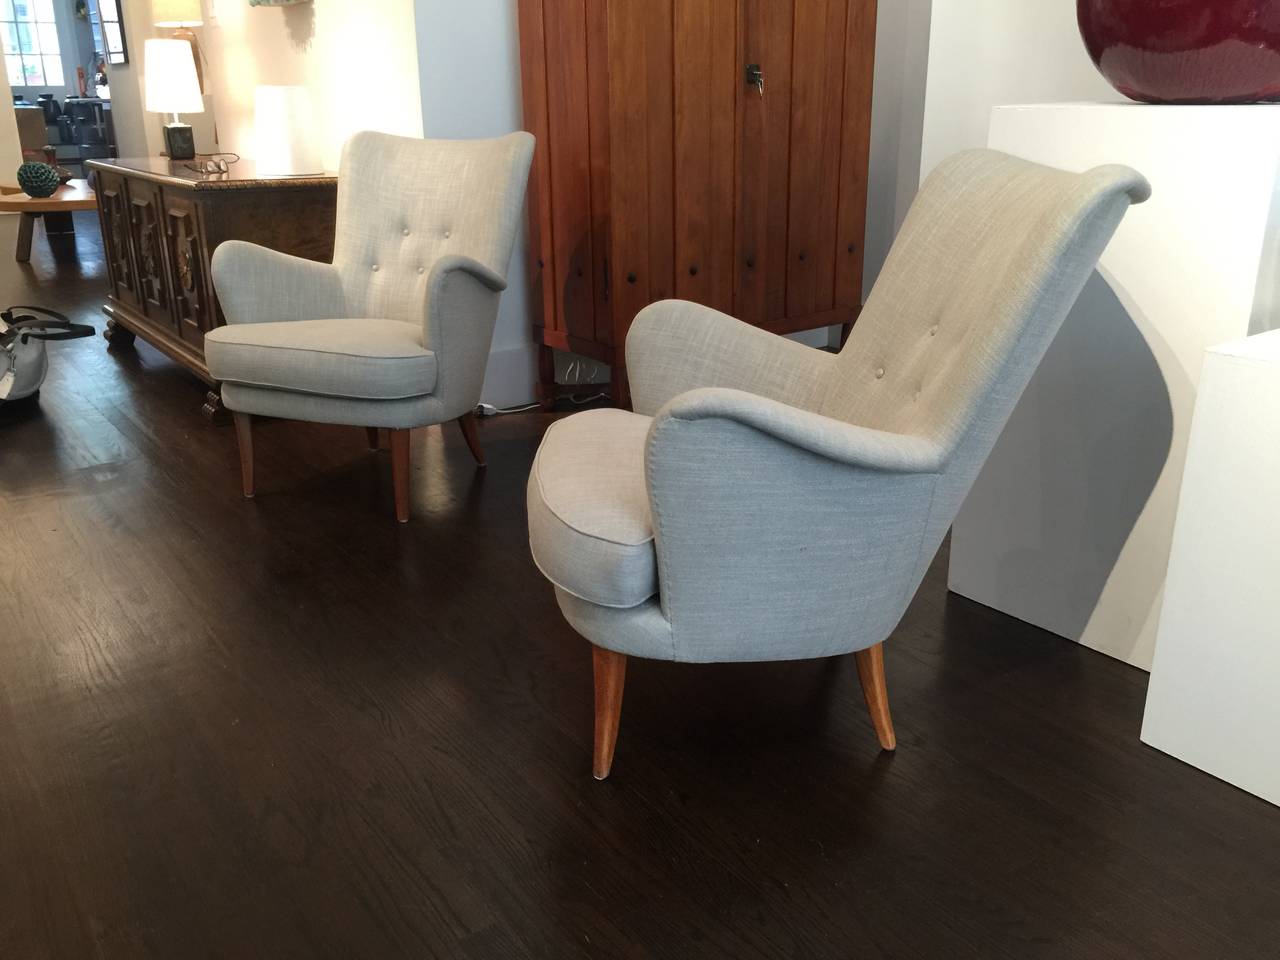 Pair of elegant armchairs by Carl Malmsten, Sweden circa 1940s.
Reupholstered in excellent condition. 

33